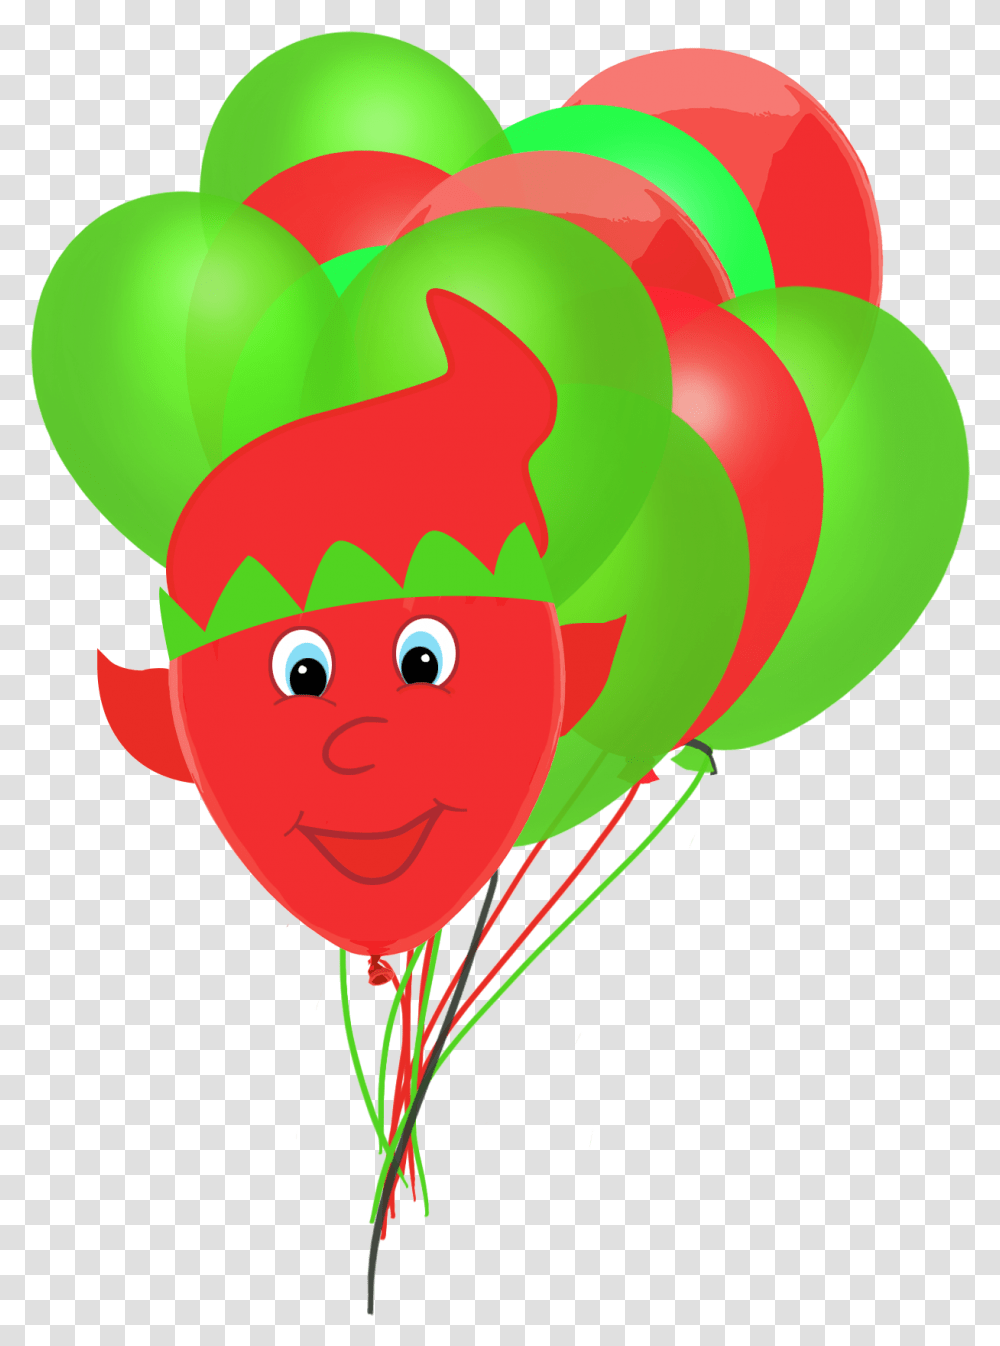 Elf Balloon And Christmas Balloons Illustration, Toy, Kite, Heart Transparent Png